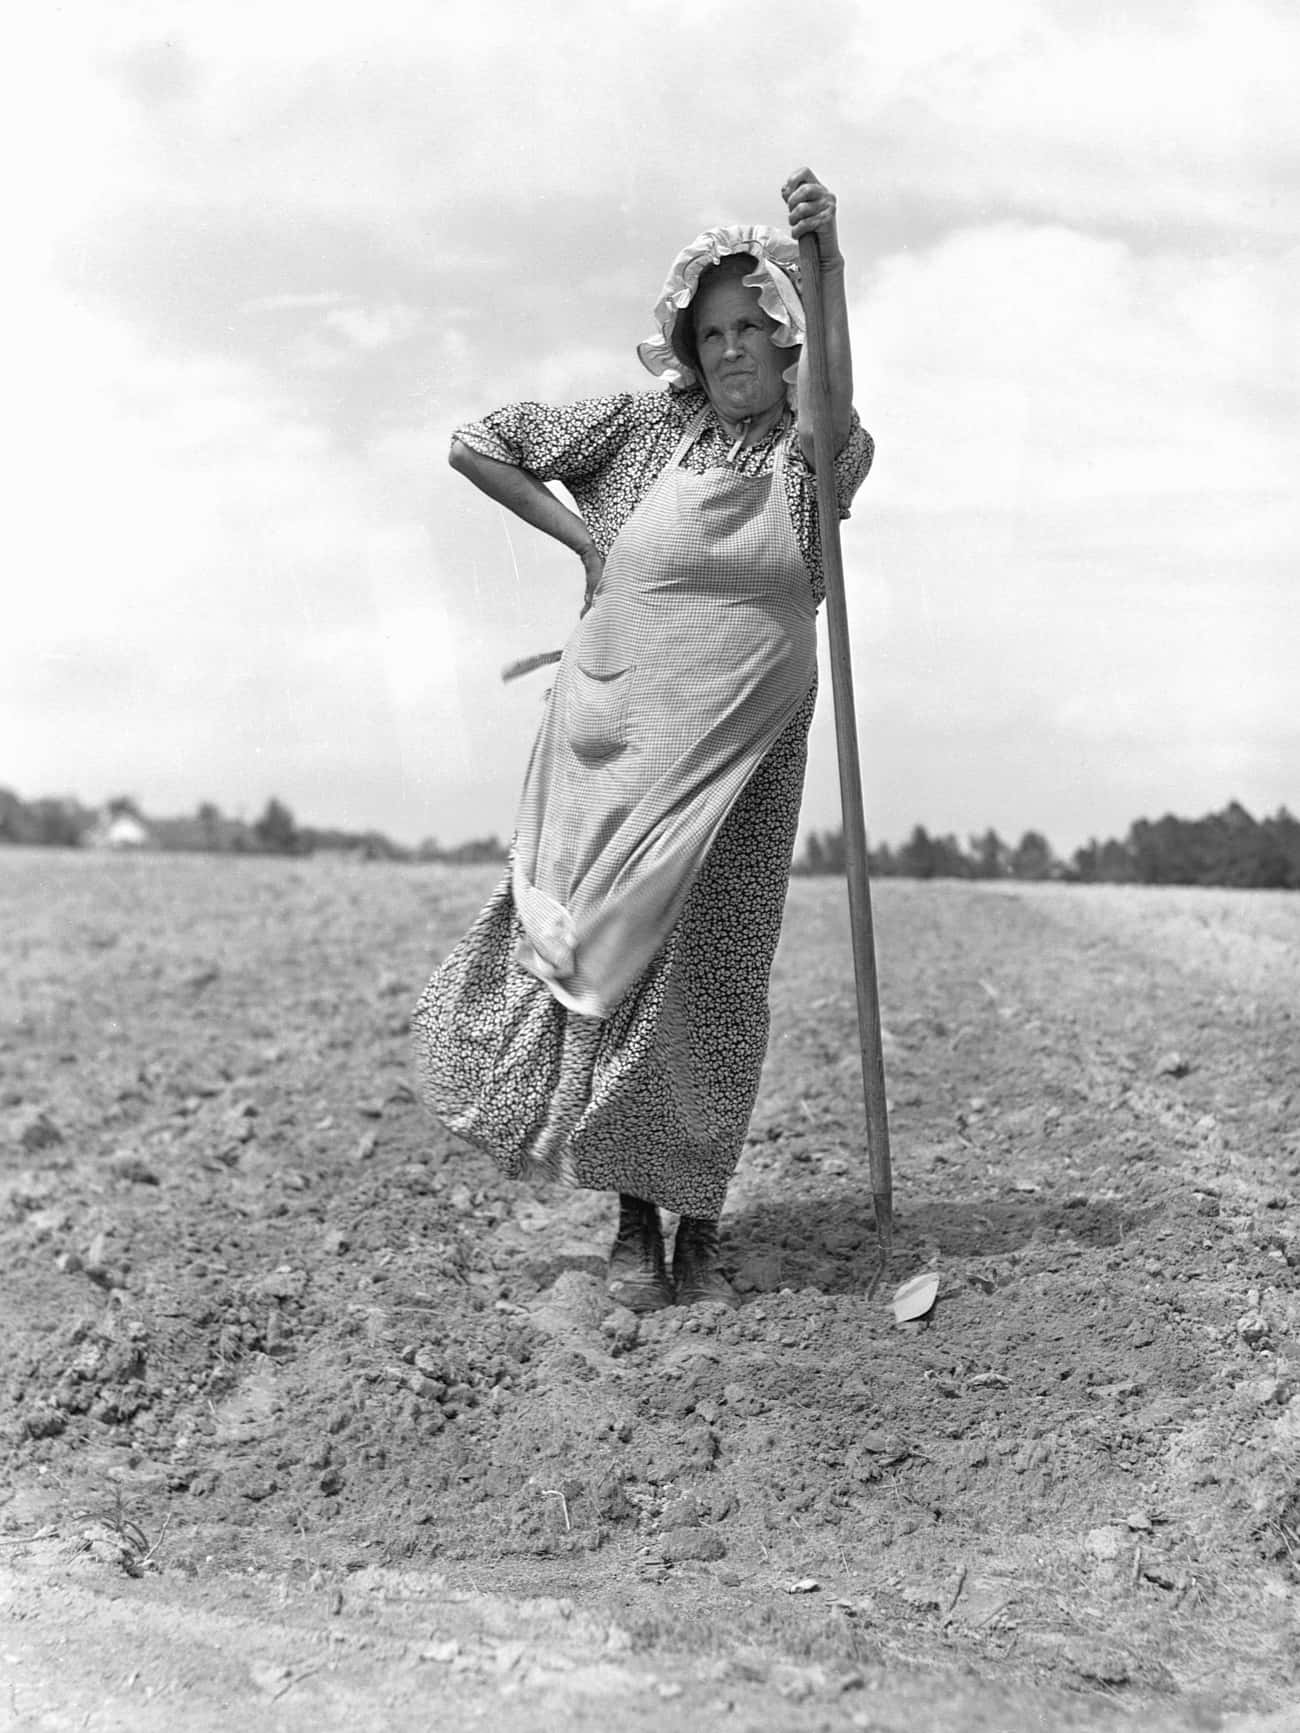 A Farm Woman Helps Her Neighbors Plant Tobacco In Durham, NC, 1940